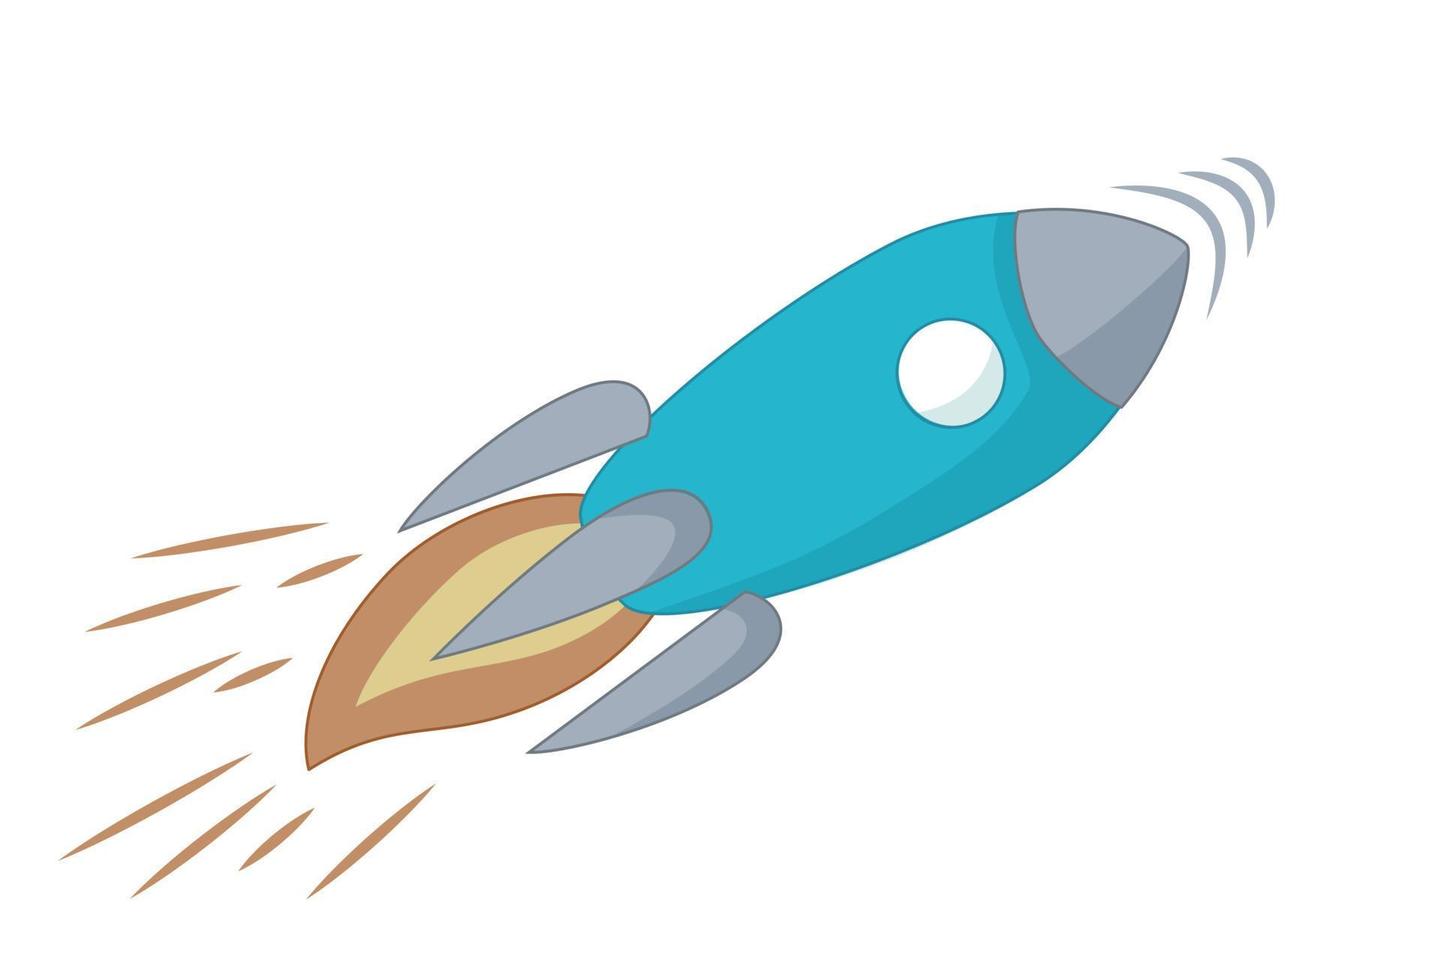 Rocket flying in outer space. SciFi concept in cartoon style. Vector illustration